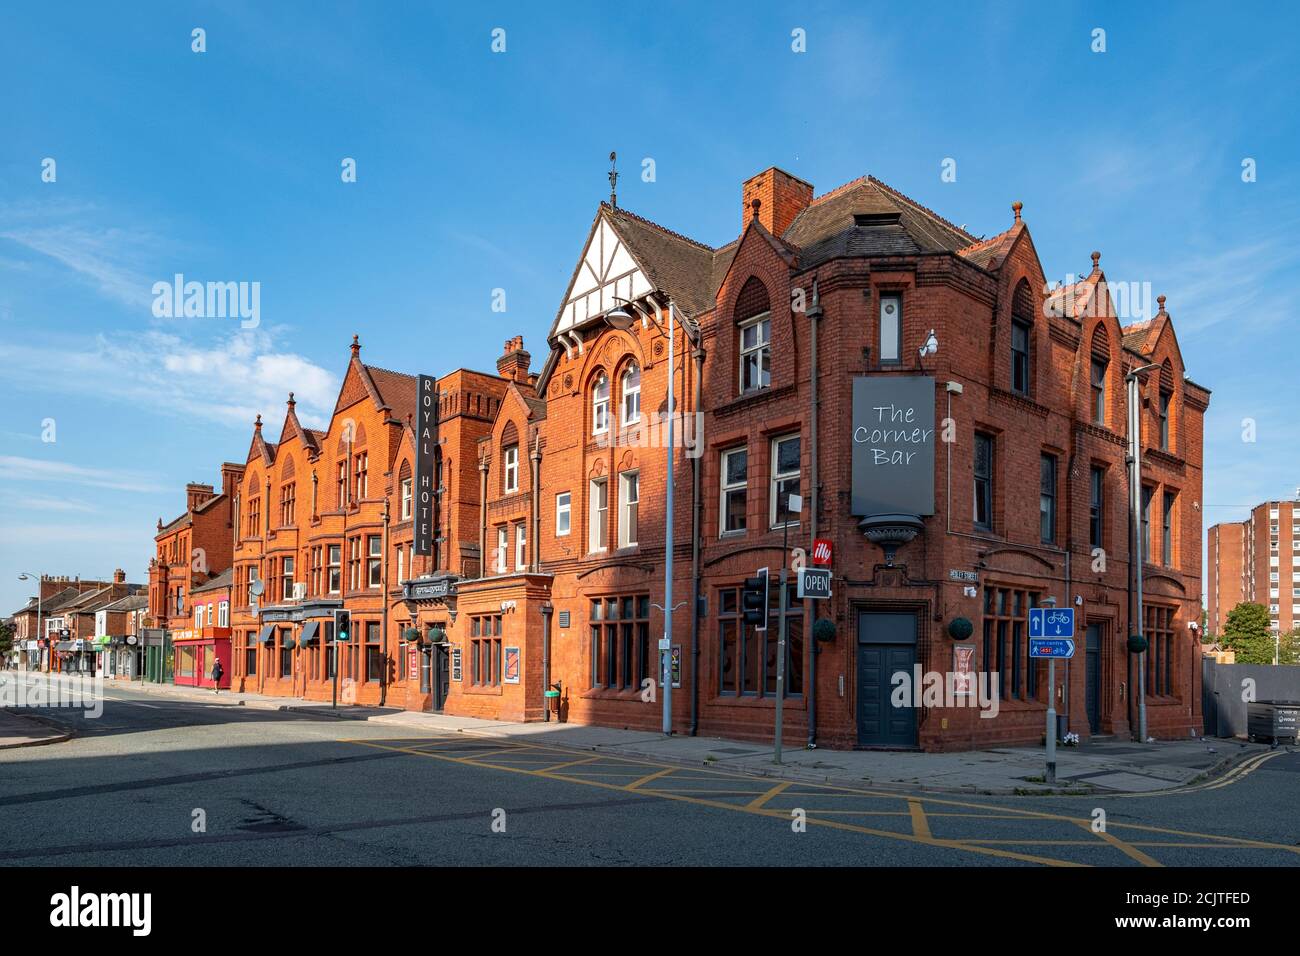 The Royal Hotel on Nantwich Road in Crewe Cheshire UK Foto Stock